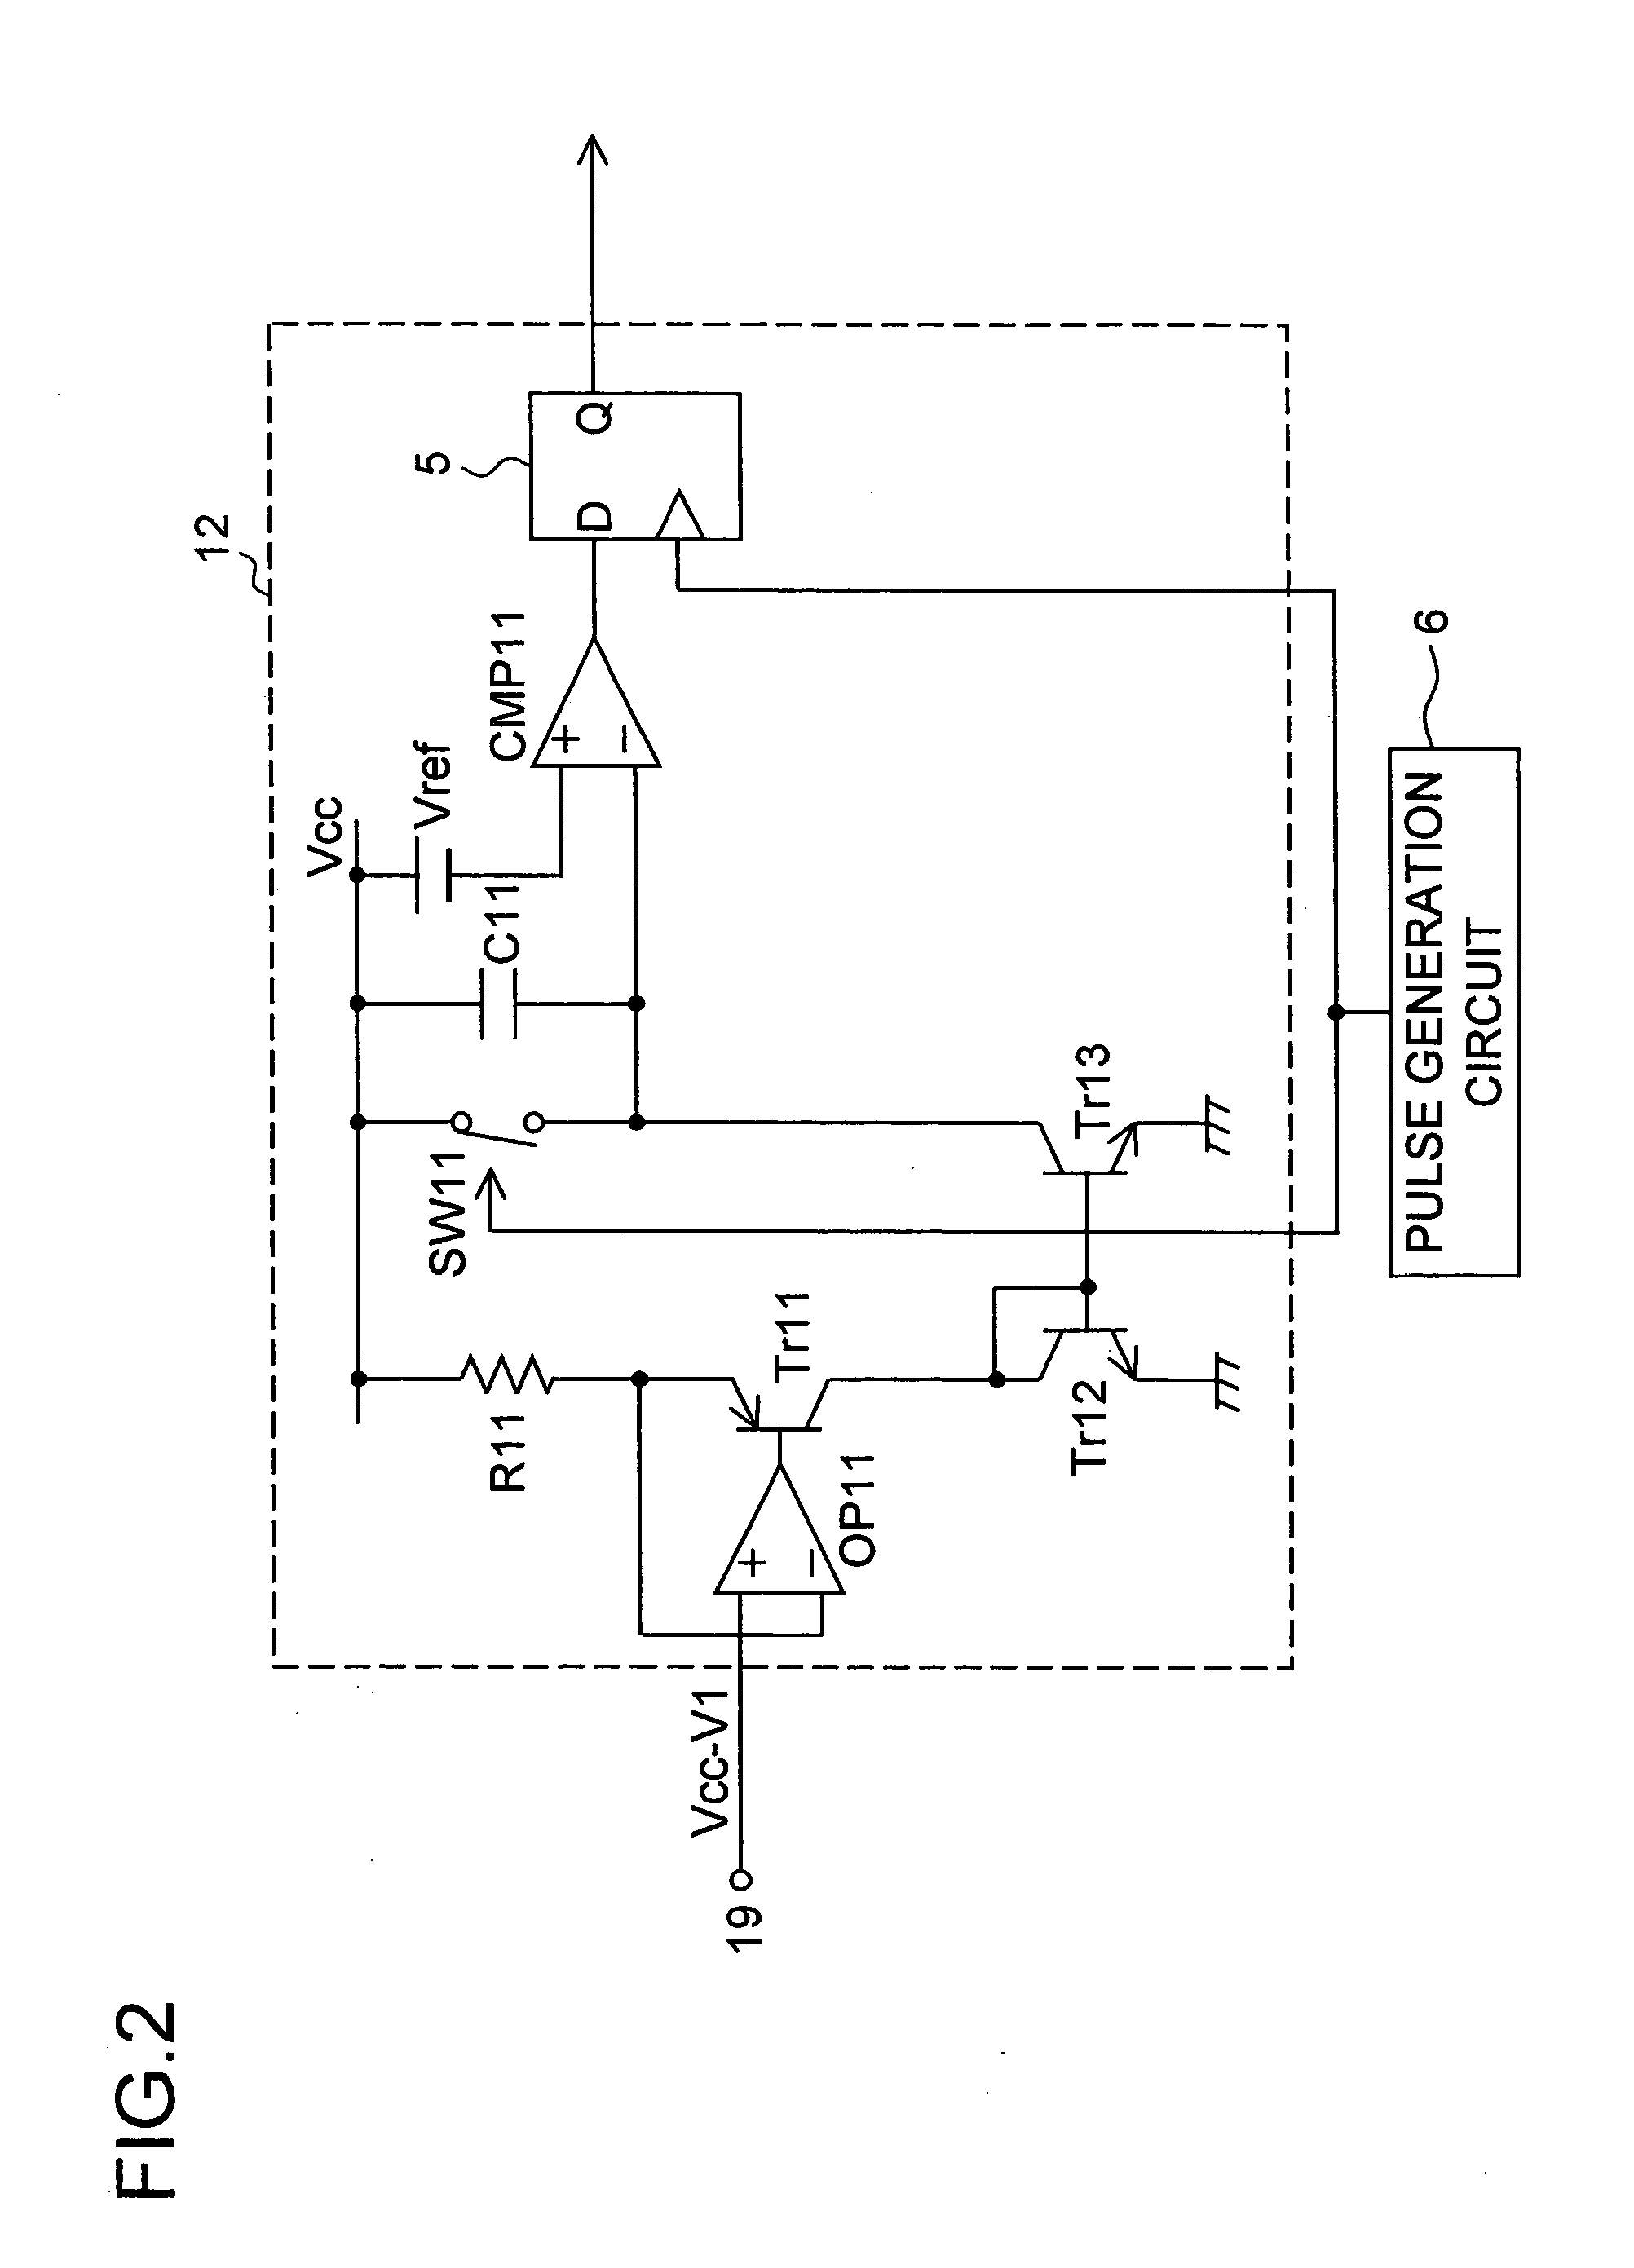 Automatic time constant adjustment circuit